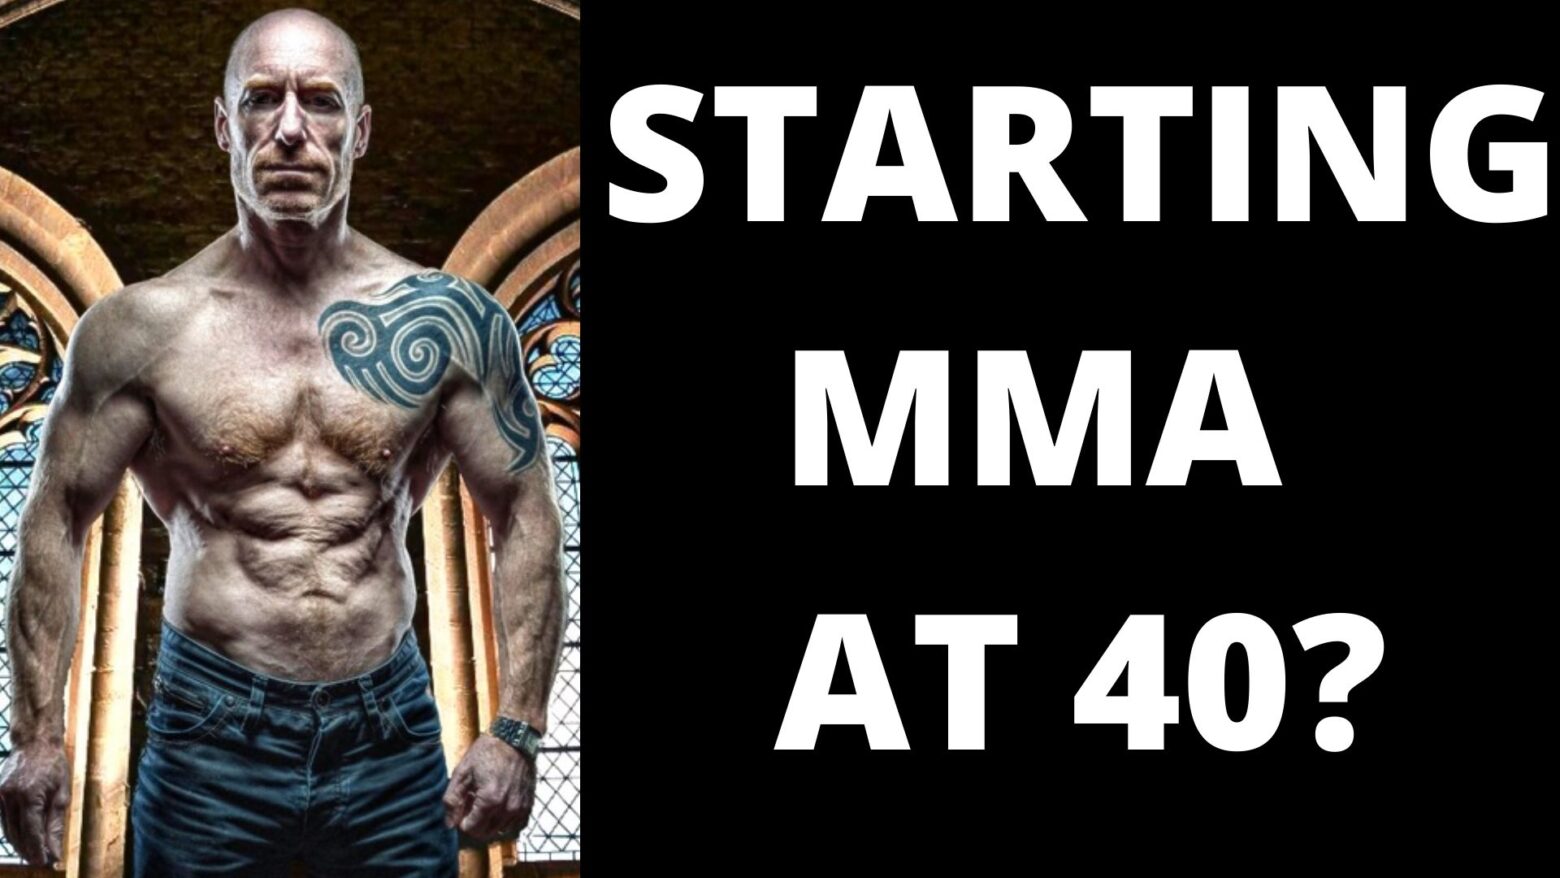 Tips for Starting MMA at 40